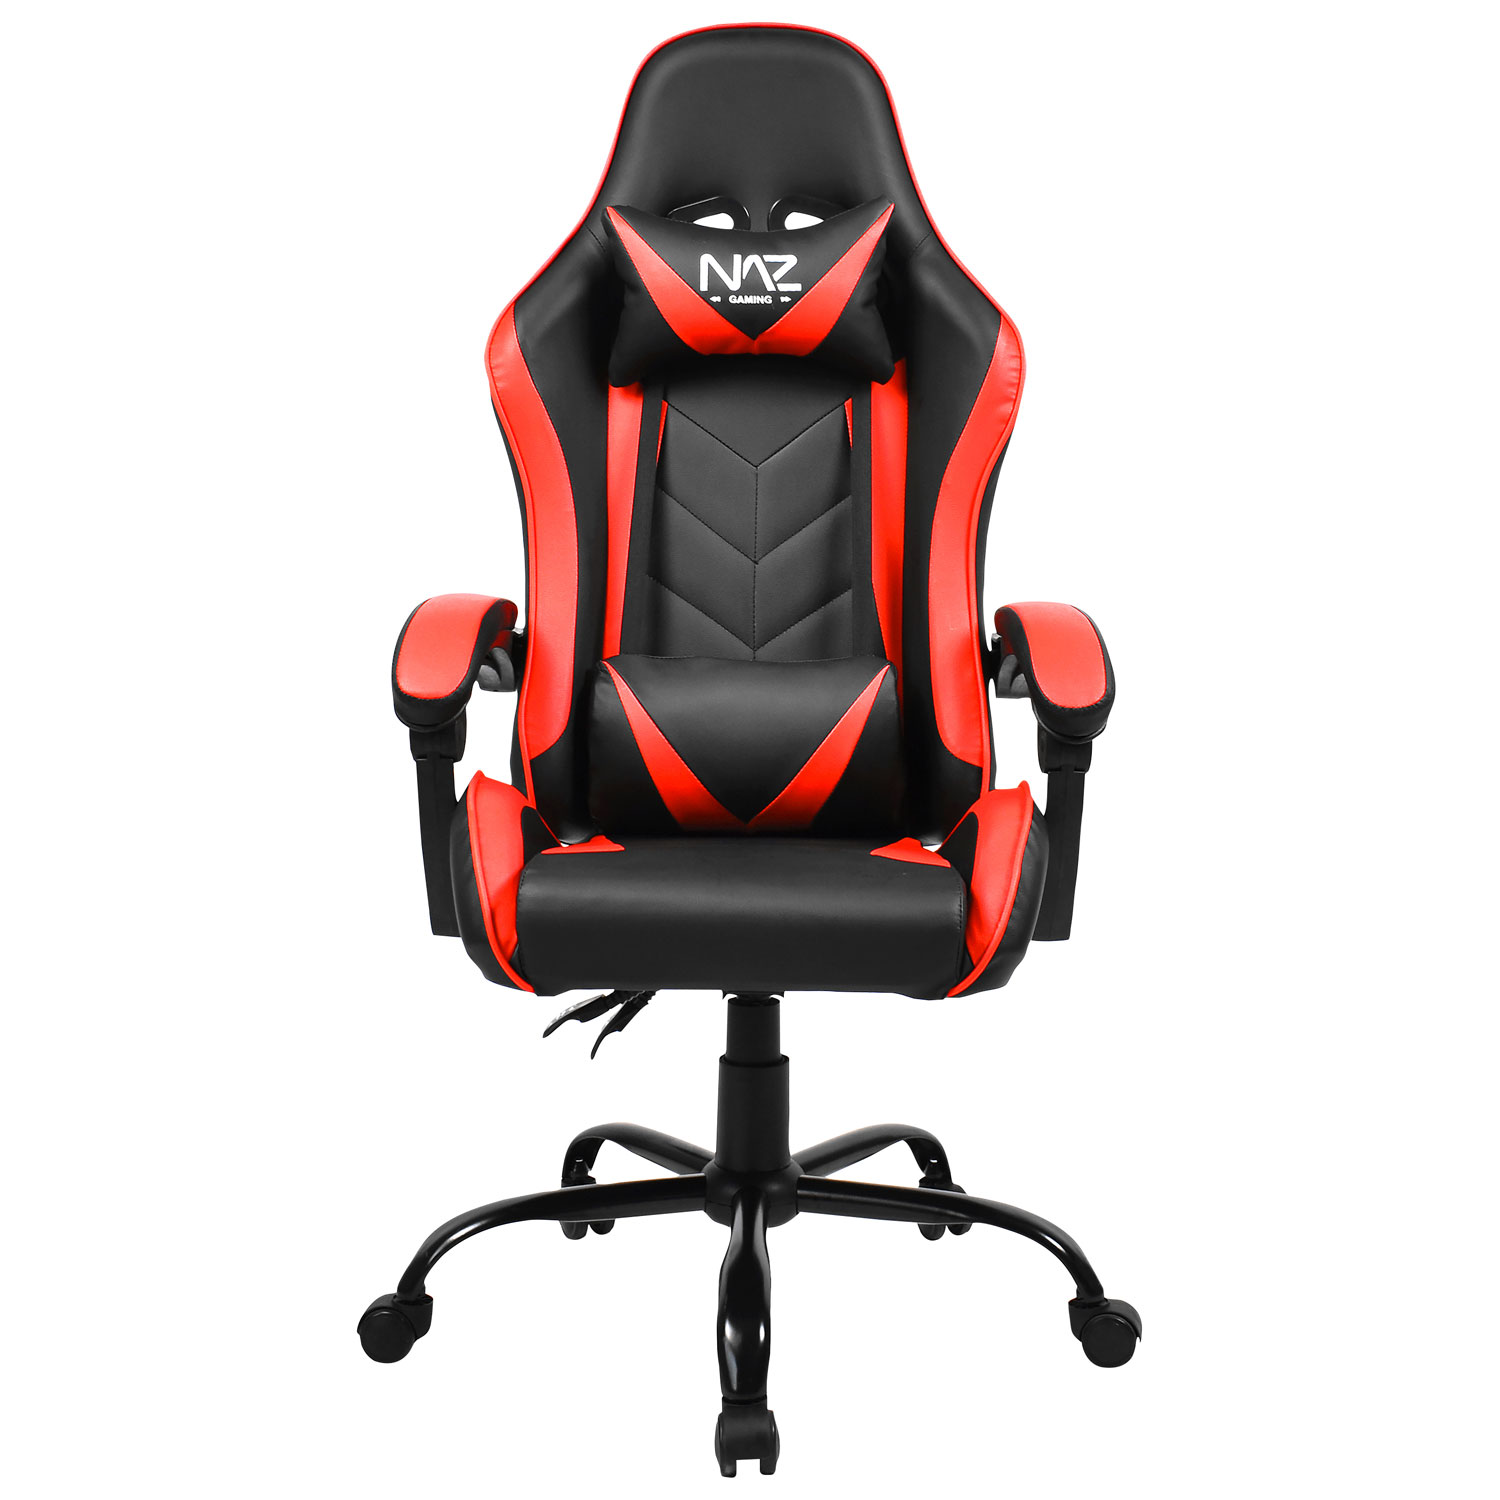 Naz Comfort Ergonomic Faux Leather Gaming Chair - Red/Black